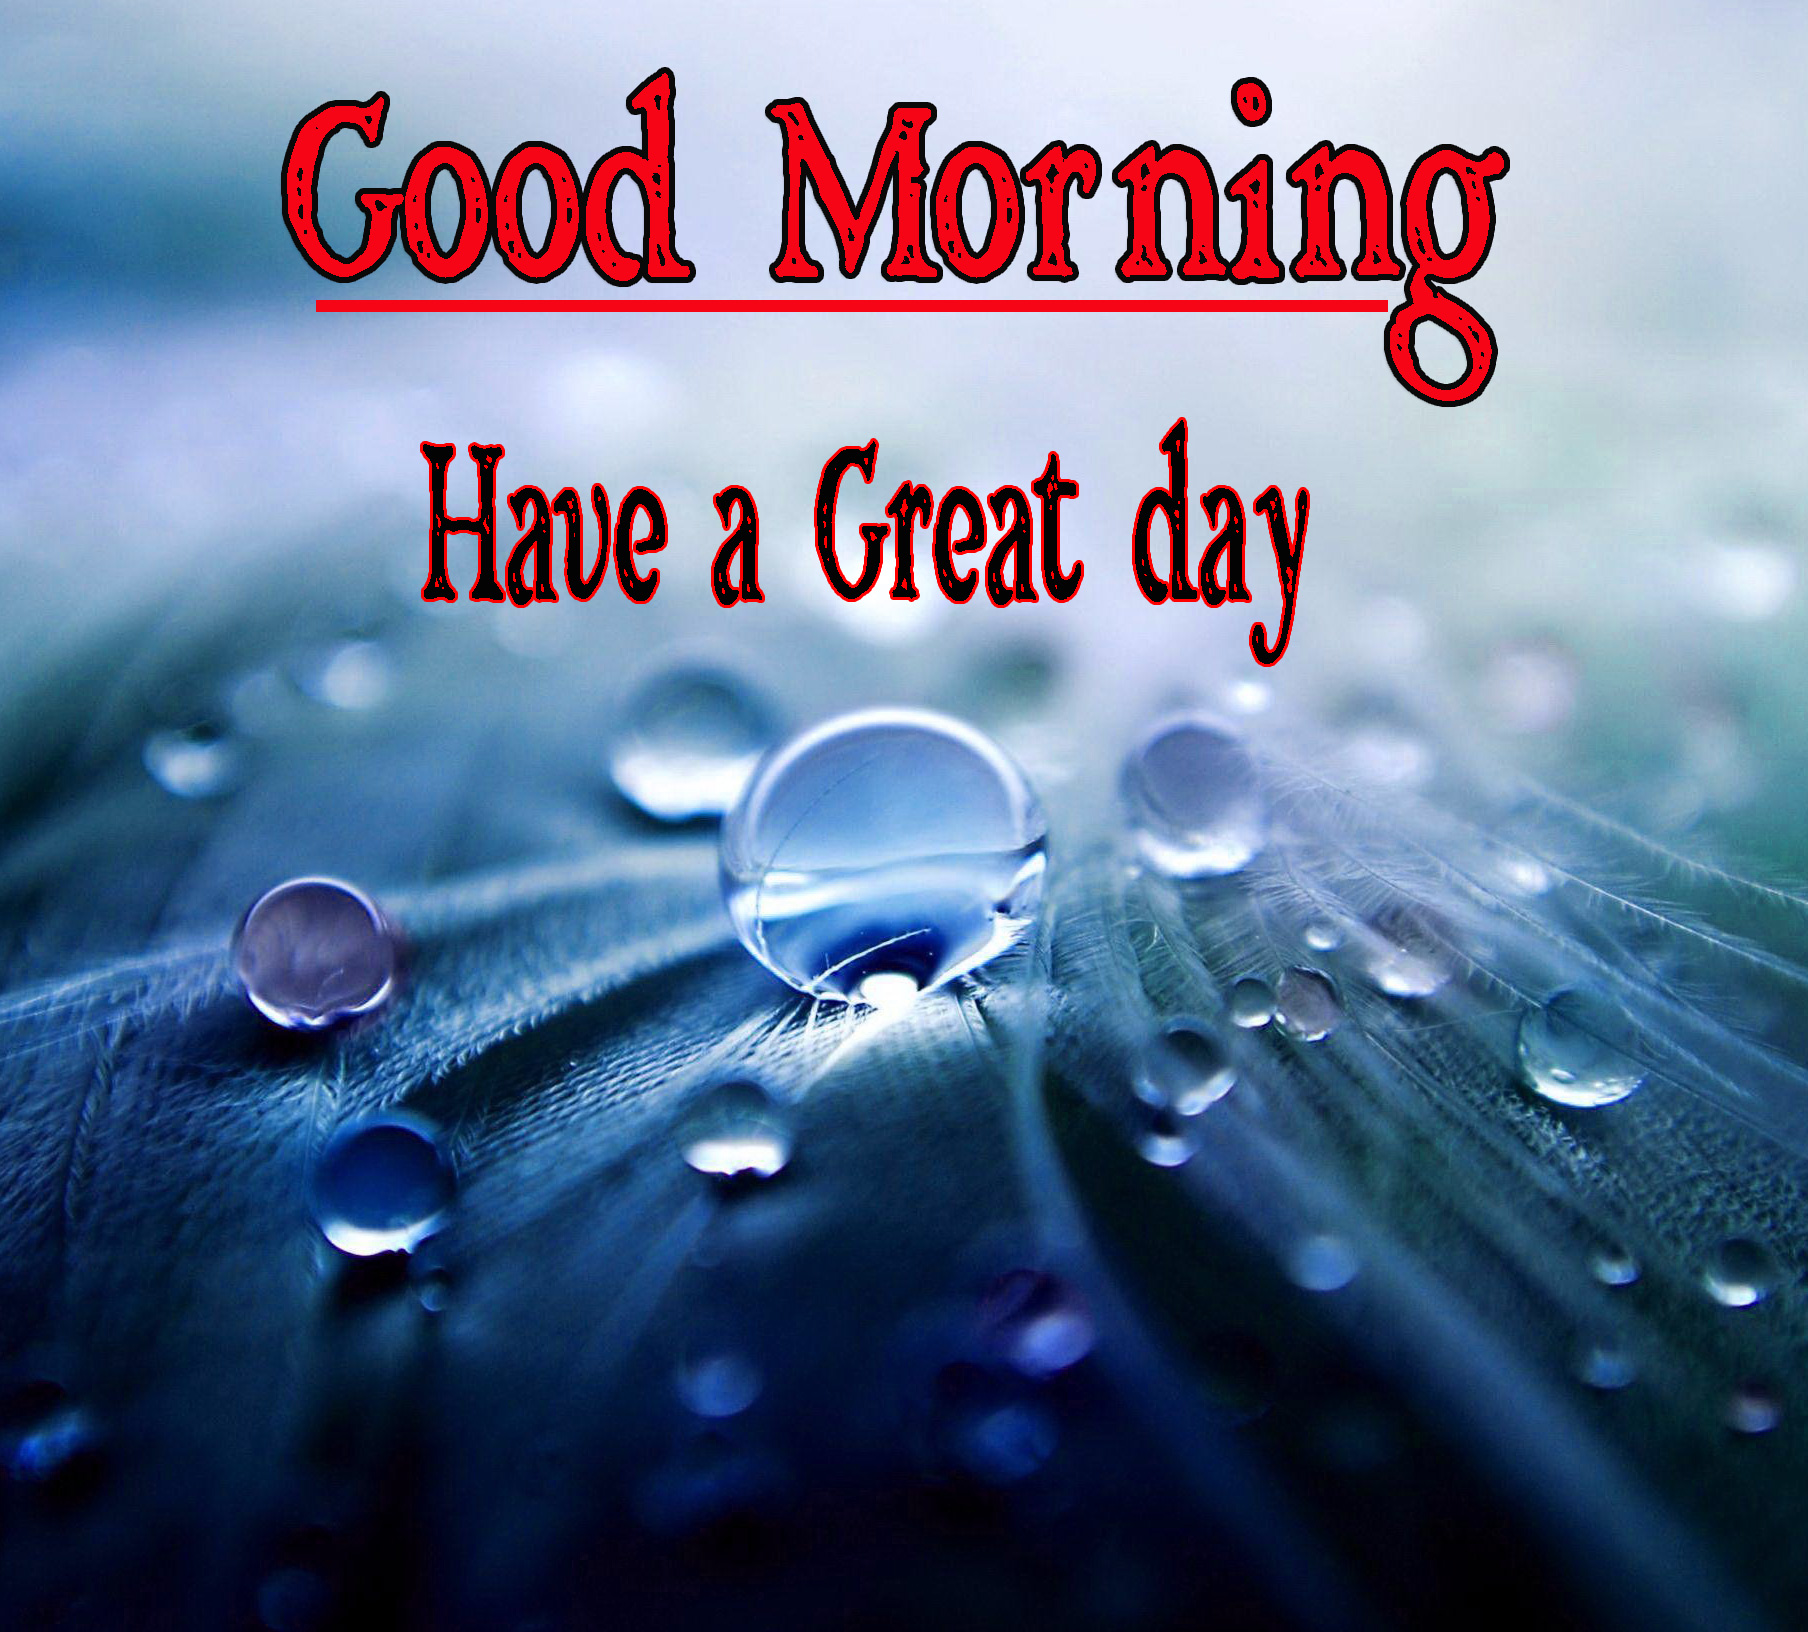 Free 1080p Very Good Morning Images Wallpaper Download 